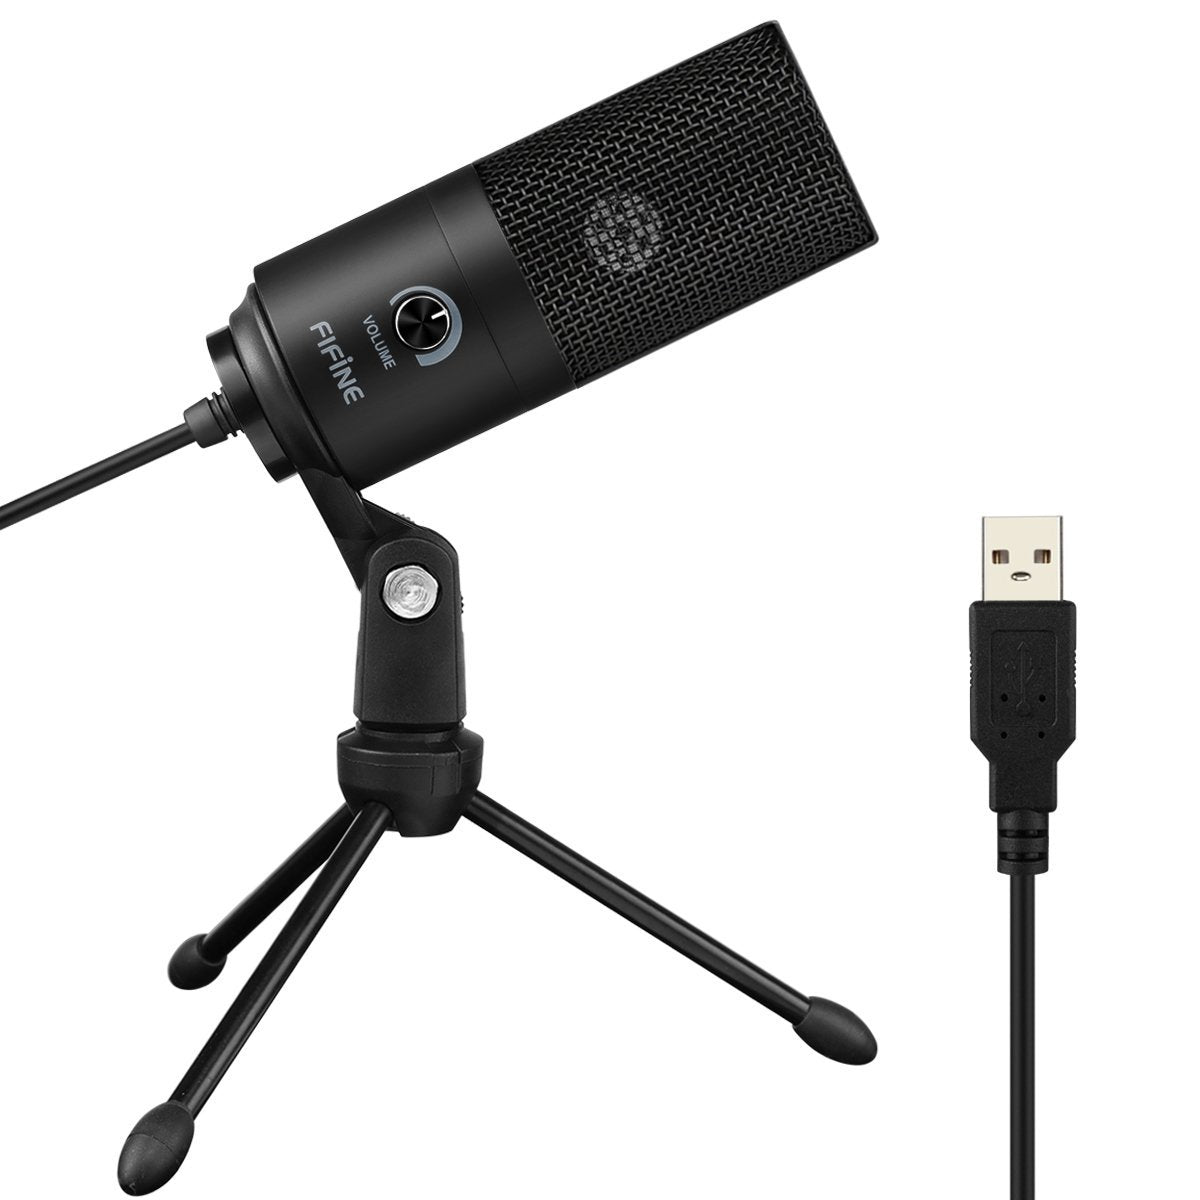 FIFINE K669 USB Microphone with Volume Dial for Streaming, Vocal